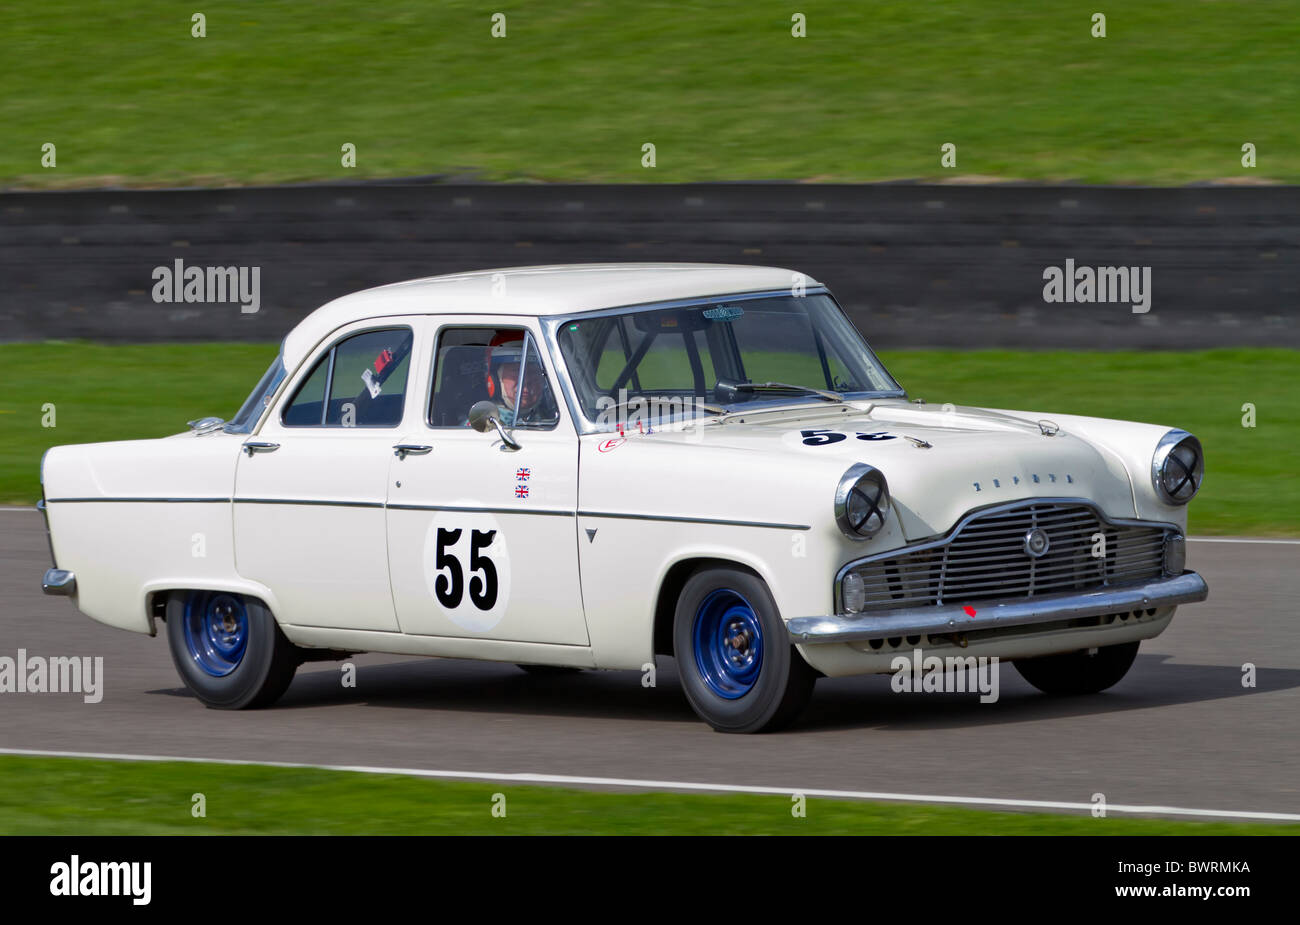 1959 Ford Zephyr MkII with driver Alistair Dyson at the 2010 Goodwood Revival, Sussex, England, UK. St Mary's Trophy Race. Stock Photo